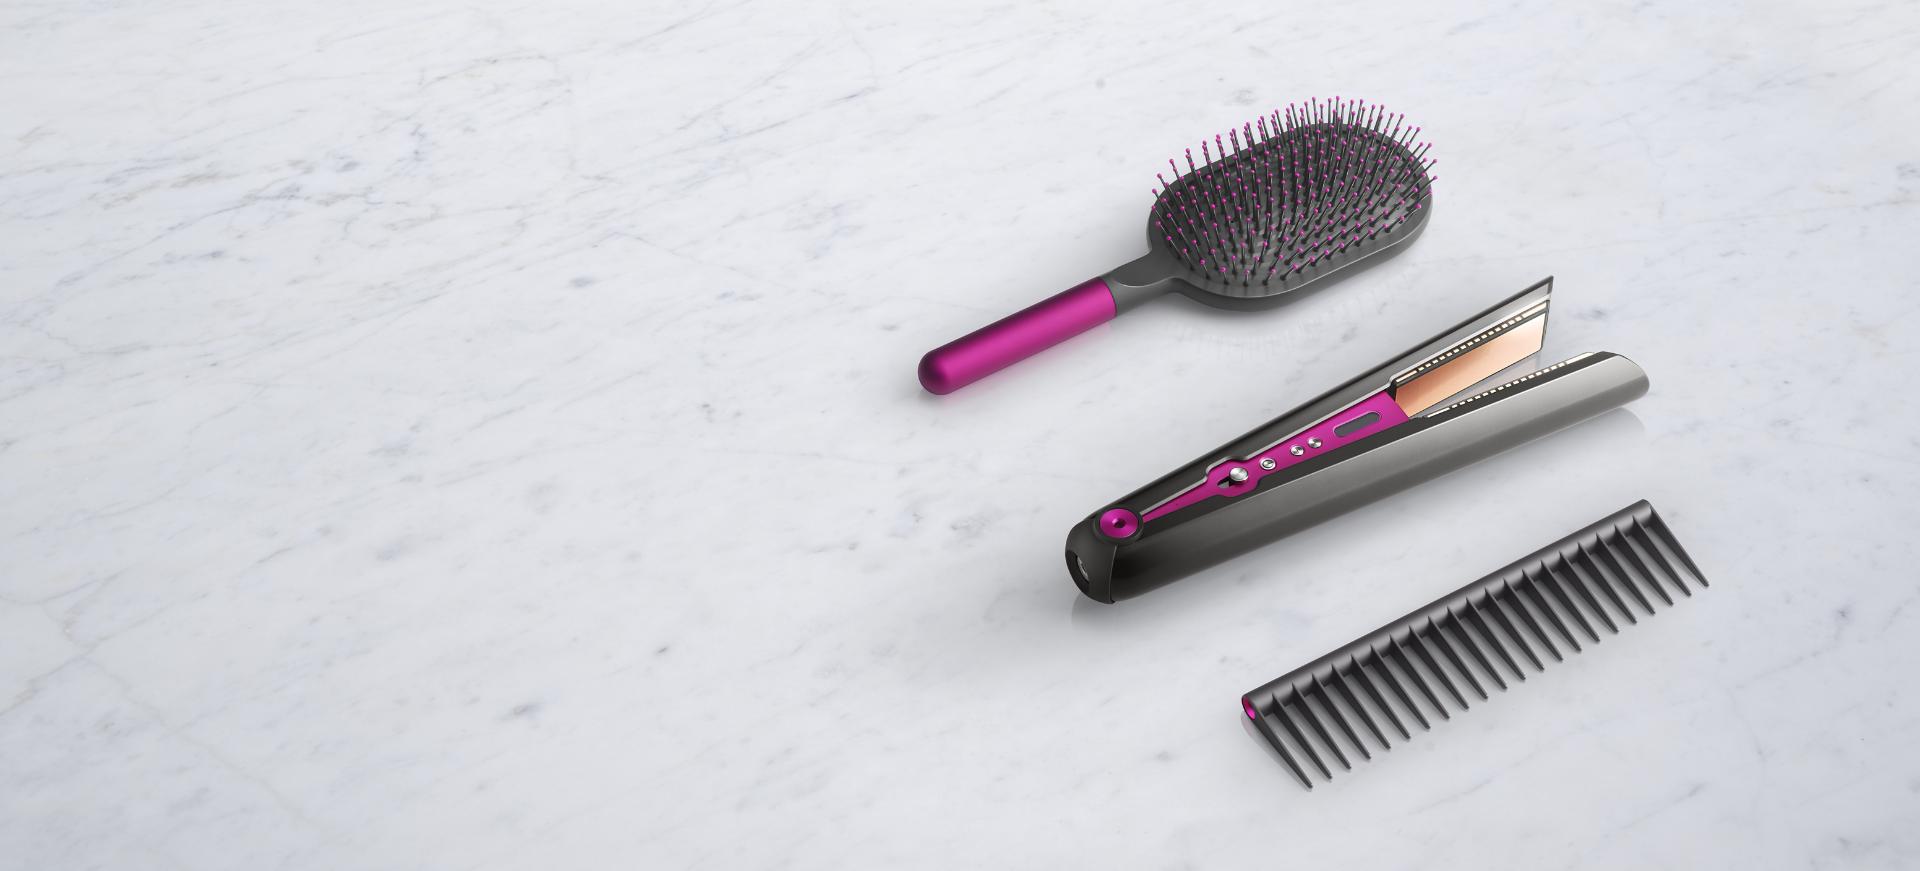 Dyson Corrale straightener with Paddle brush and Detangling comb